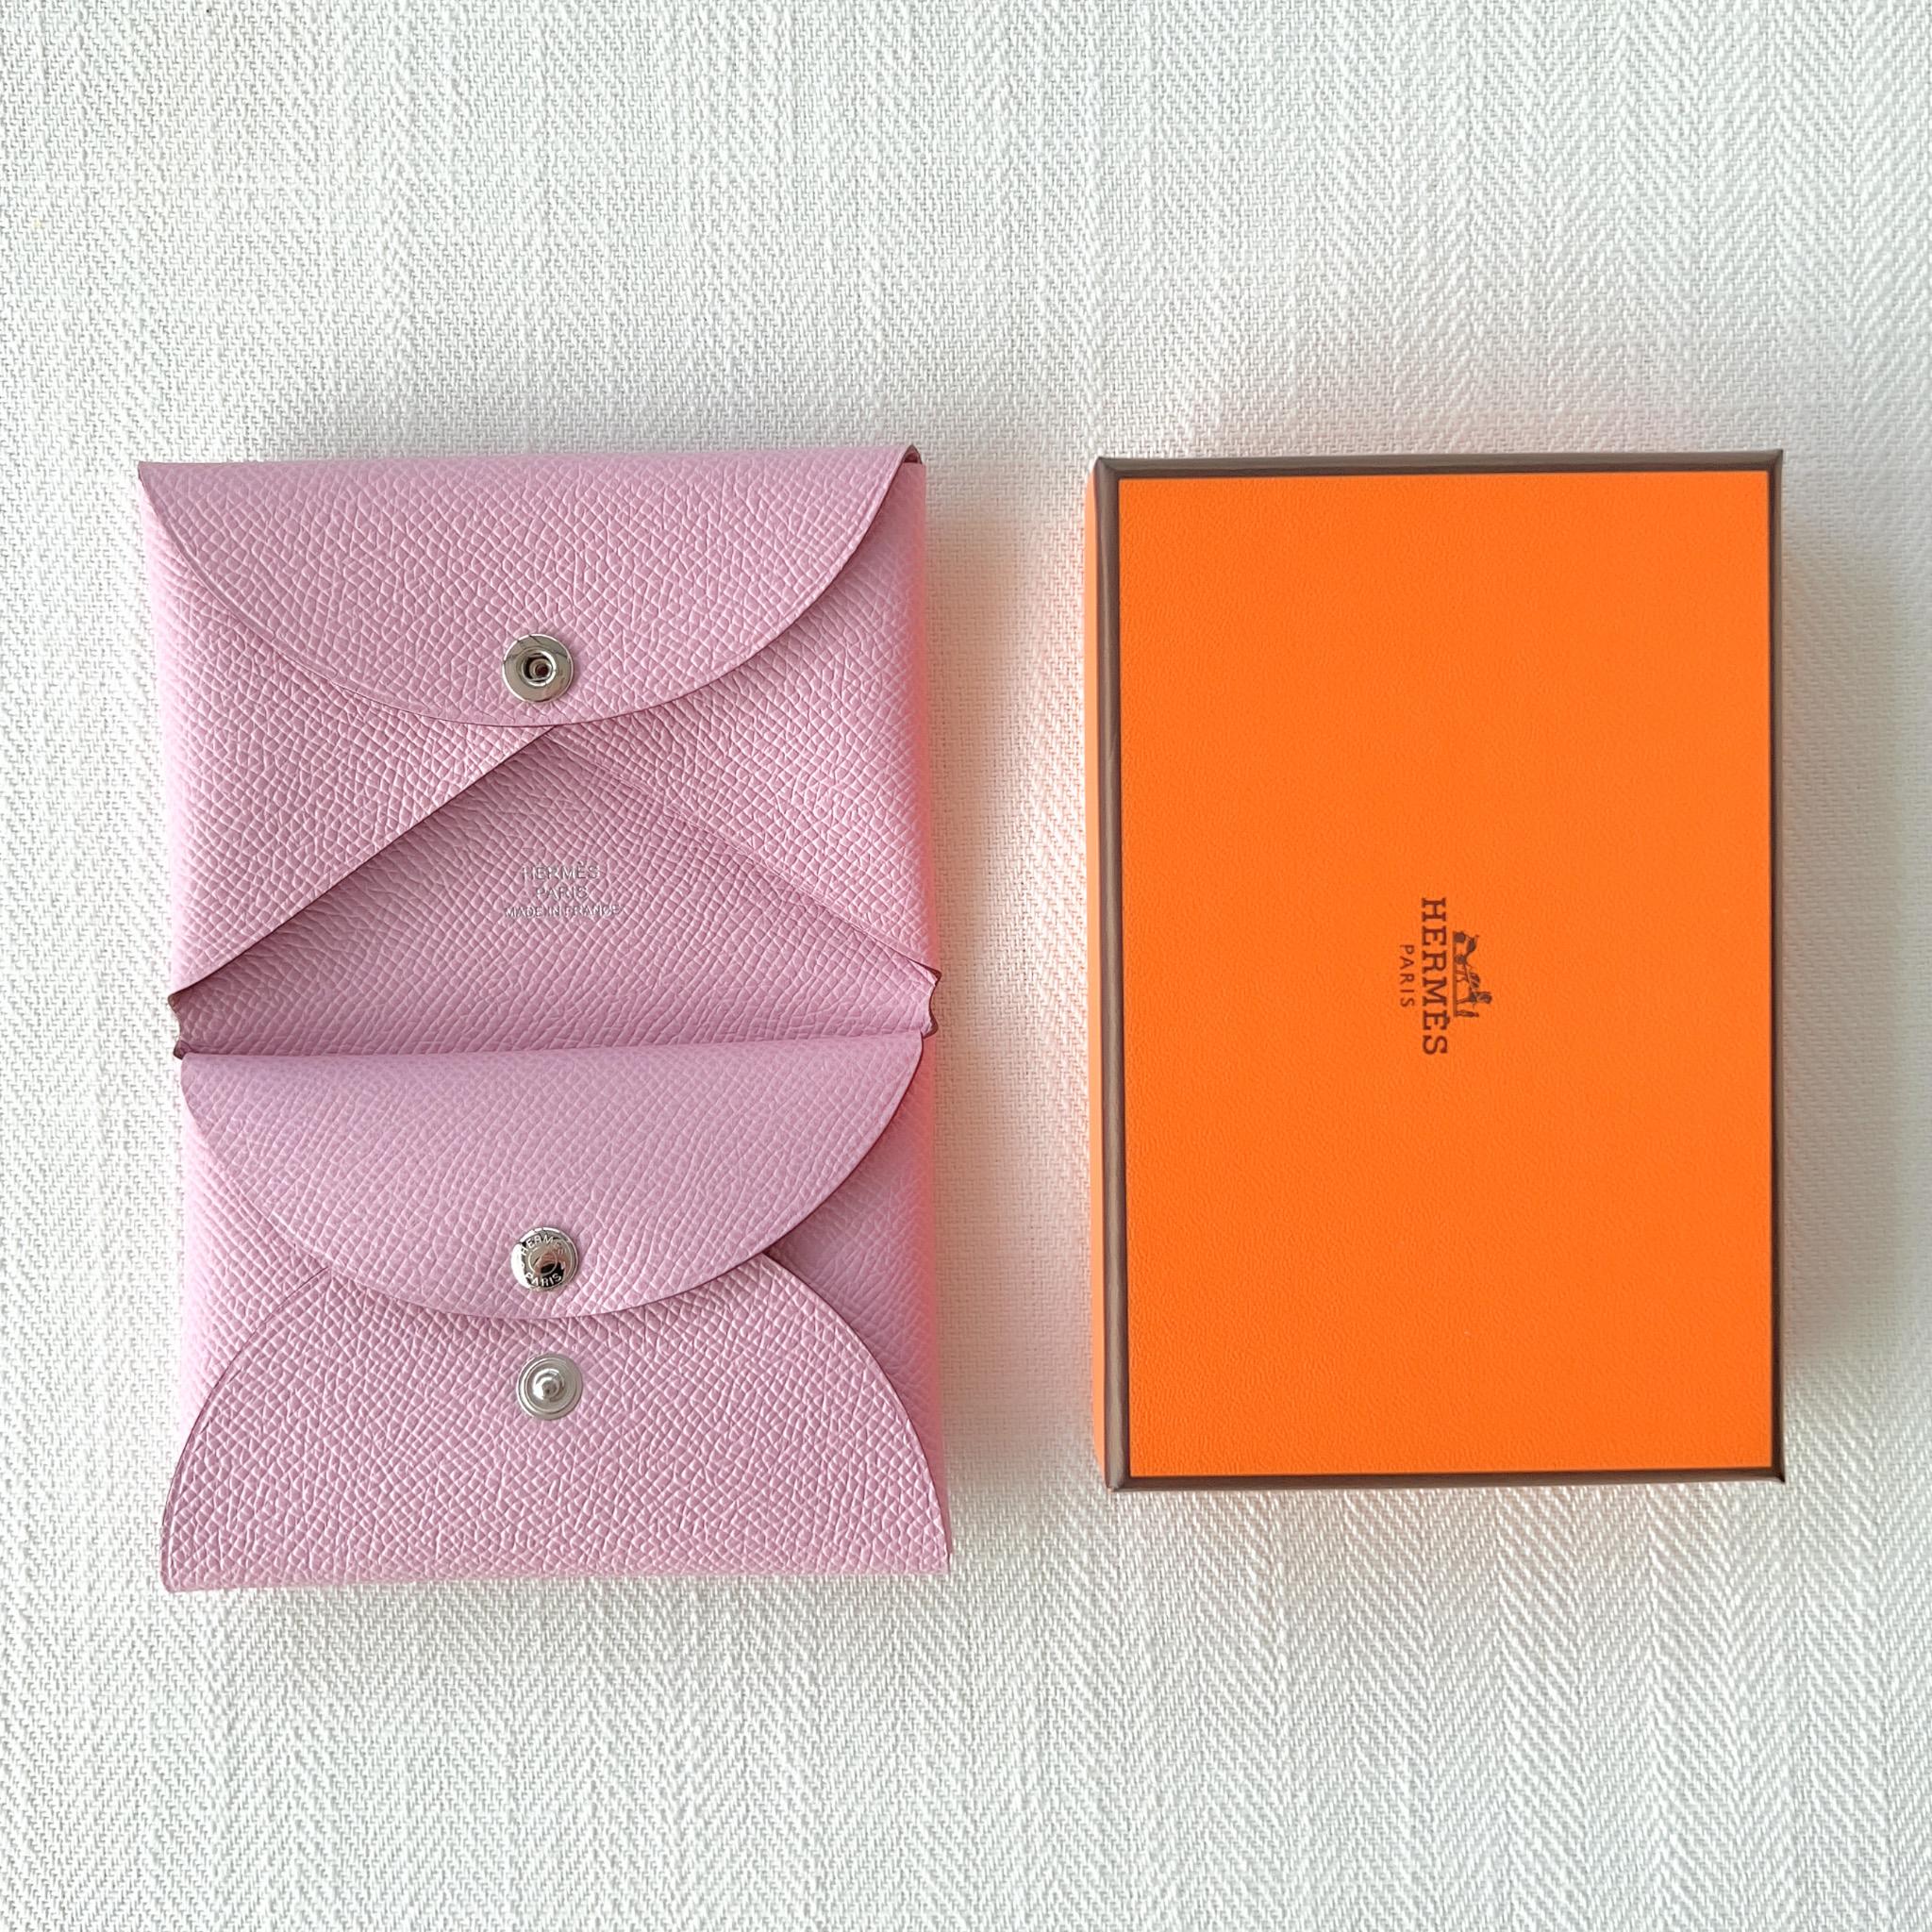 This Hermès Calvi Duo Card Holder in Mauve Sylvestre, Pink is made from luxurious Epsom leather, it features a snap closure and 2 credit card slots. The Calvi duo is the redesigned version of the classic Calvi card holder. 

Brand: Hermes

Colour: